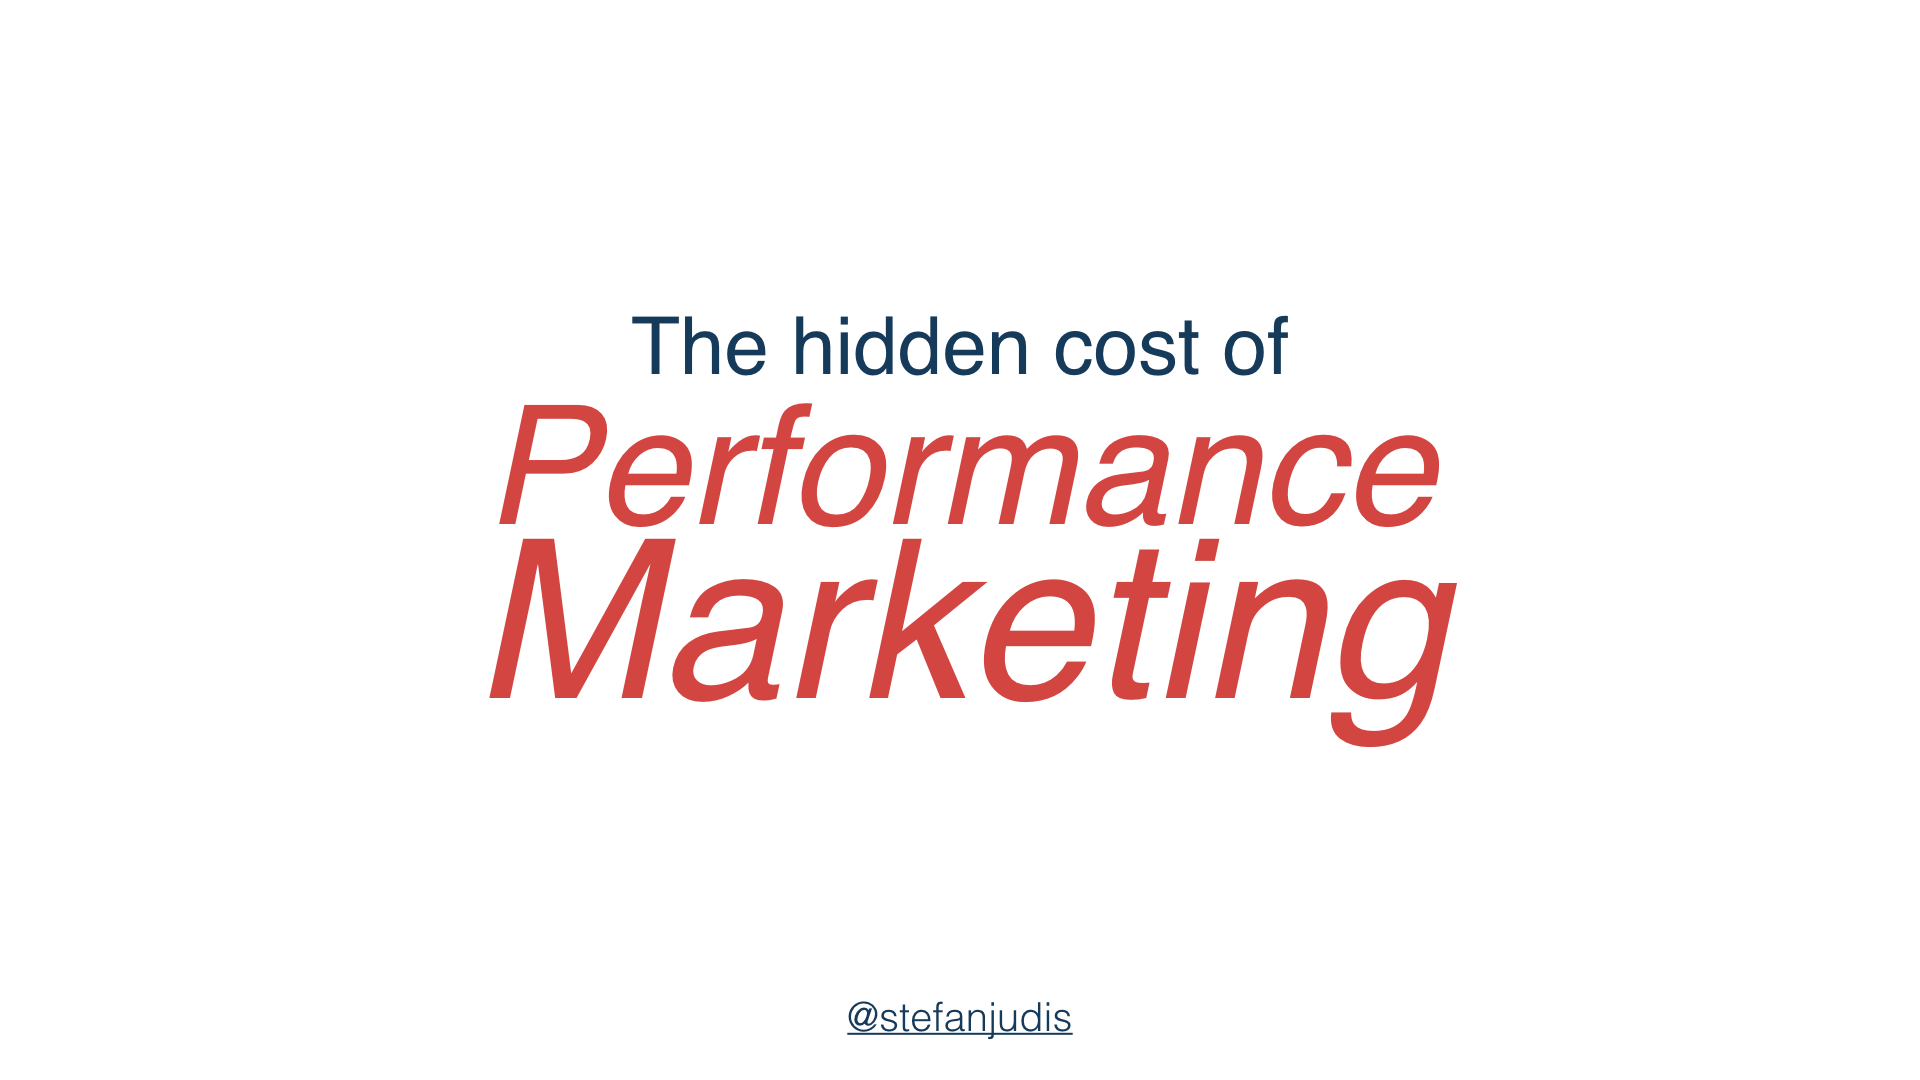 The hidden cost of performance marketing